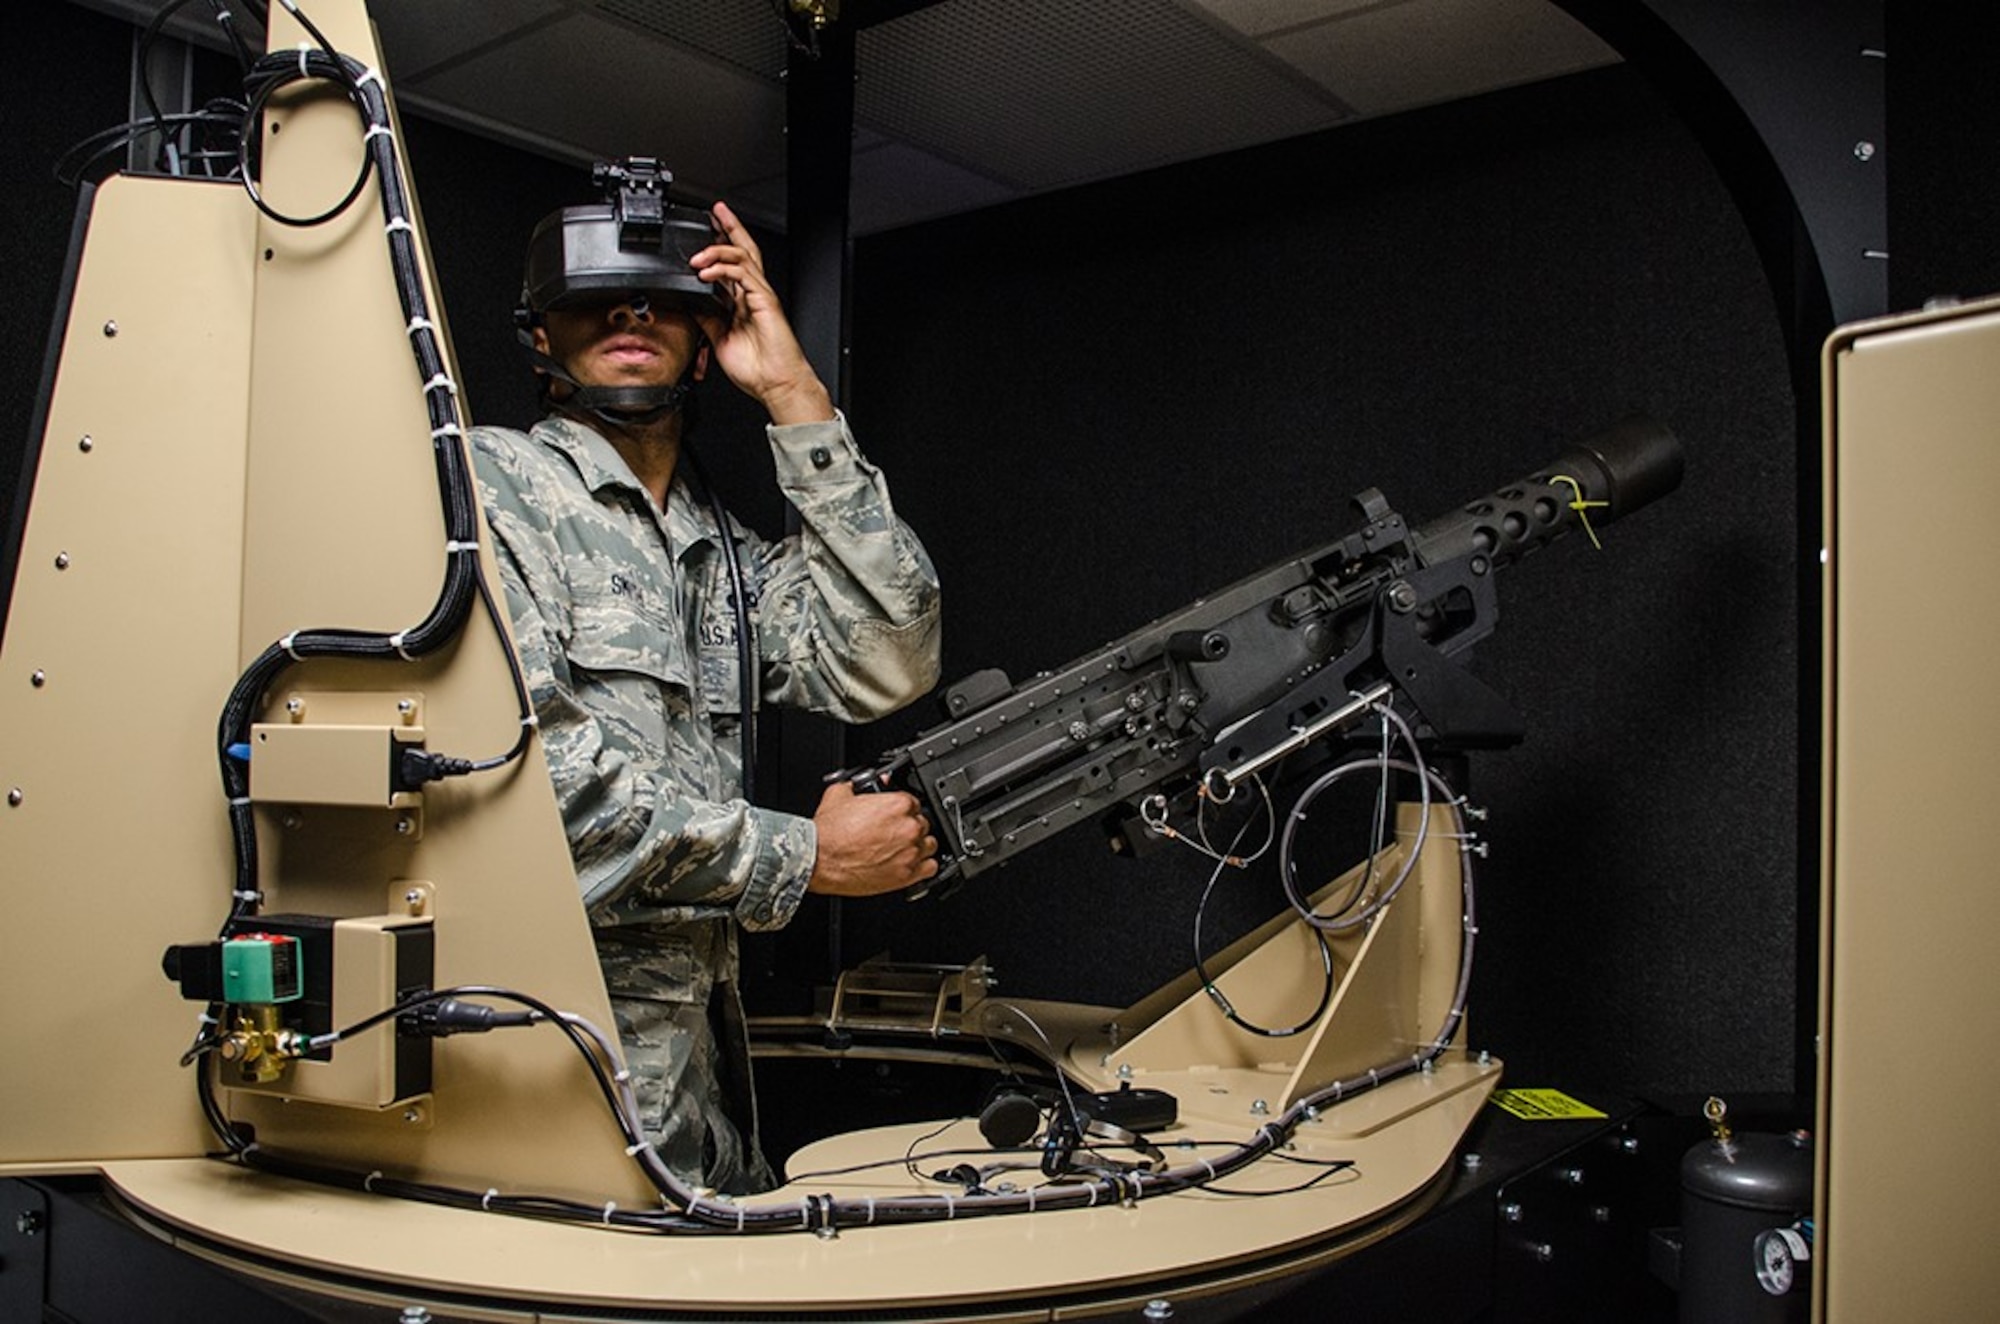 Senior Airman Westley Smith, a weapons loader with the 131st Bomb Wing, participates in a virtual-reality gunner station during Annual Training at Camp Clark, Missouri, on May 18, 2016. The simulation is part of the Virtual Clearance Training Suite that helps train Airmen on real-life scenarios.